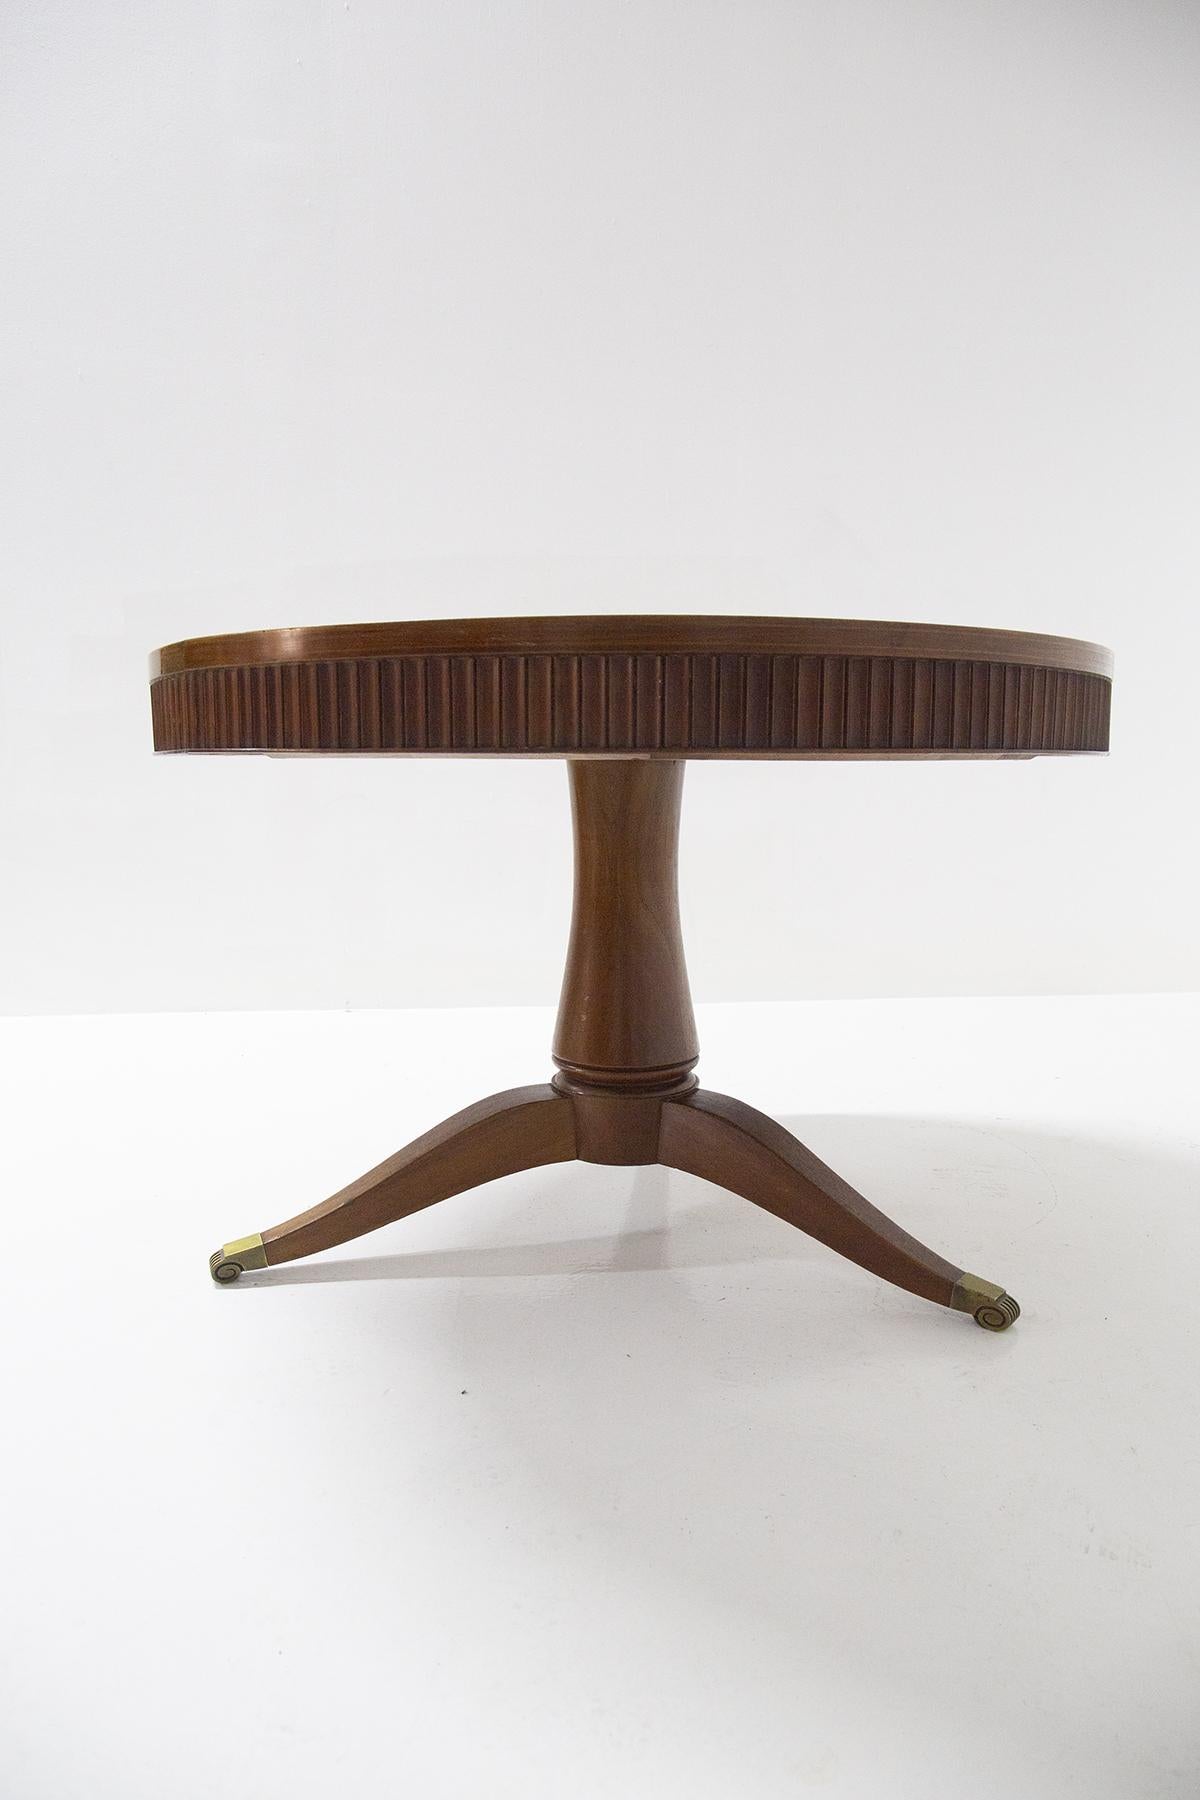 Brass Paolo Buffa Round Wooden Table for Serafino Arrighi